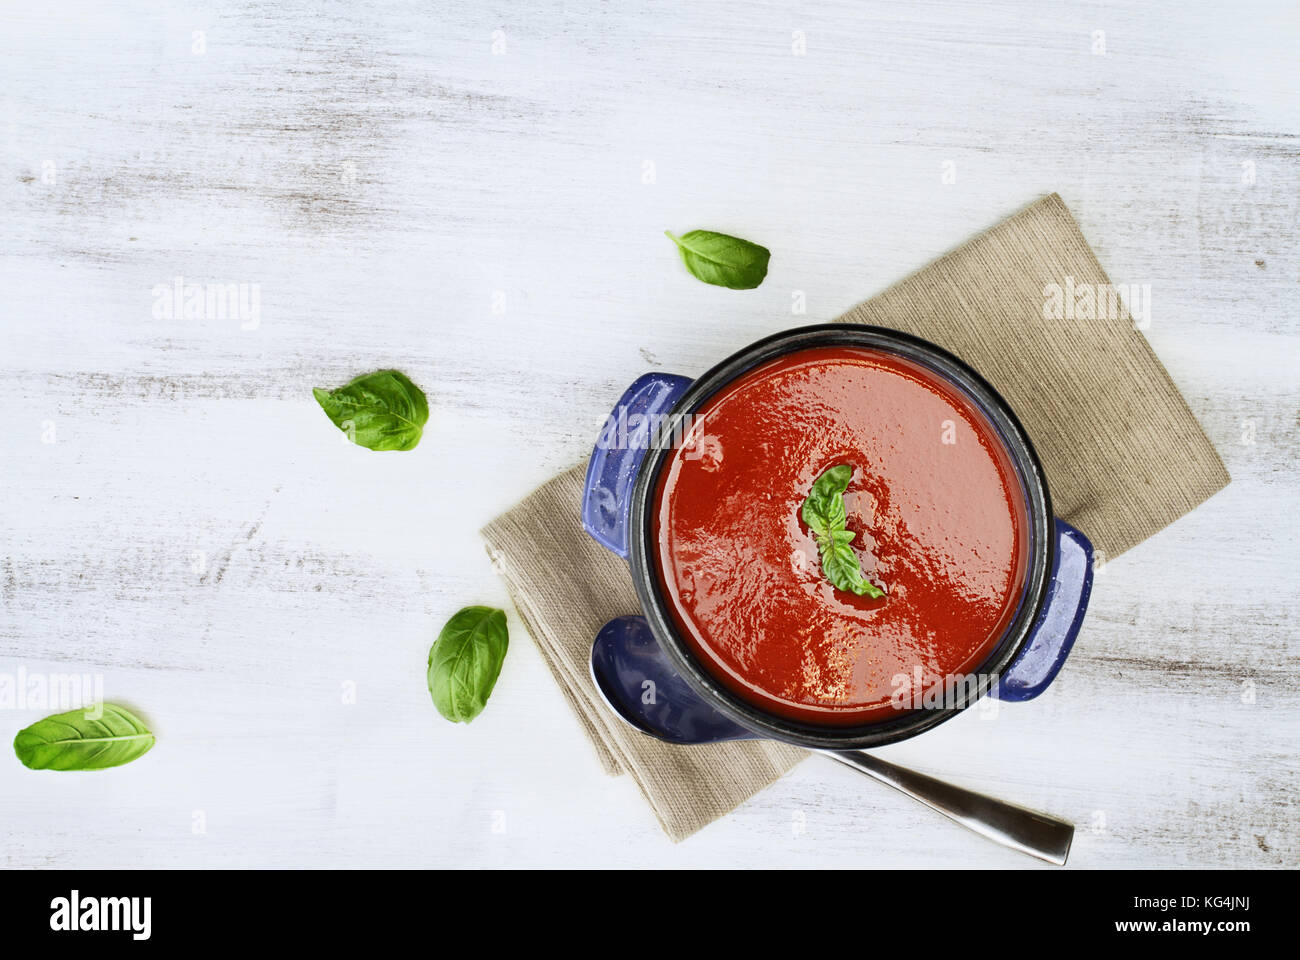 Hot tomato soup with basil leaves. Image shot from above in flat lay style. Stock Photo